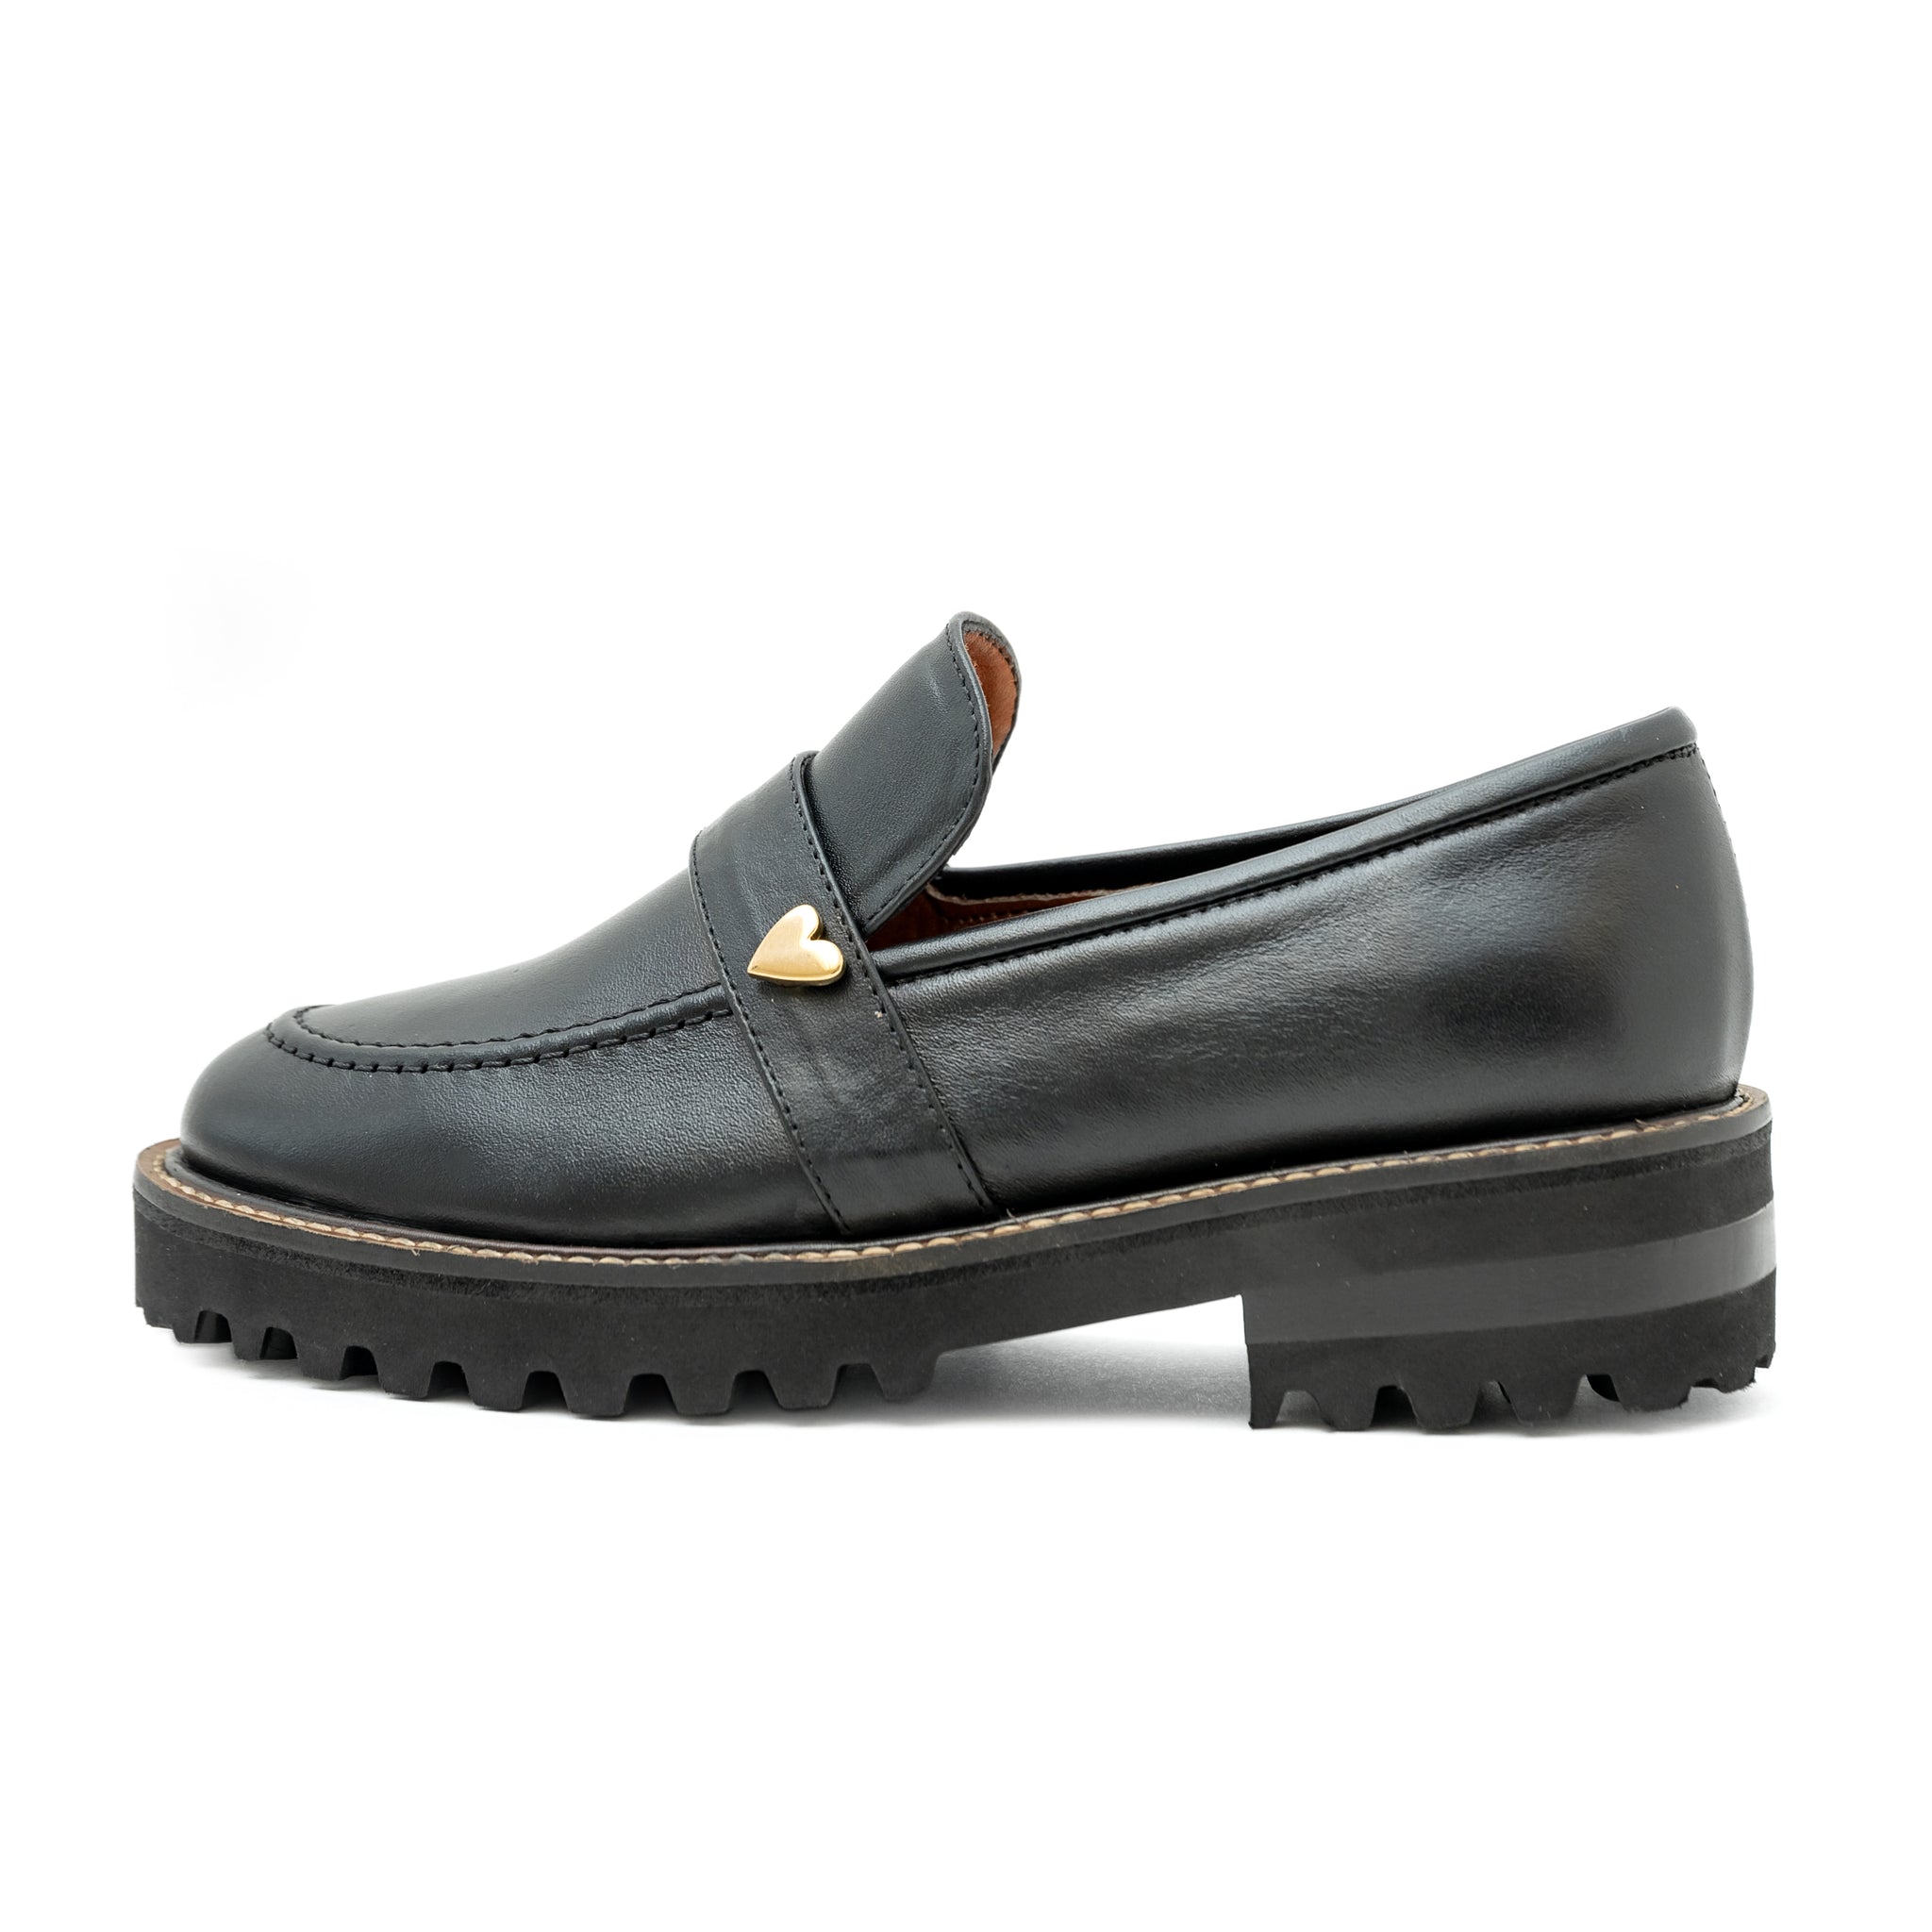 Monique Loafers by Nataly Mendez Genuine leather upper material Genuine leather insole lining Flexible rubber sole Handmade 1.5 inch heel height